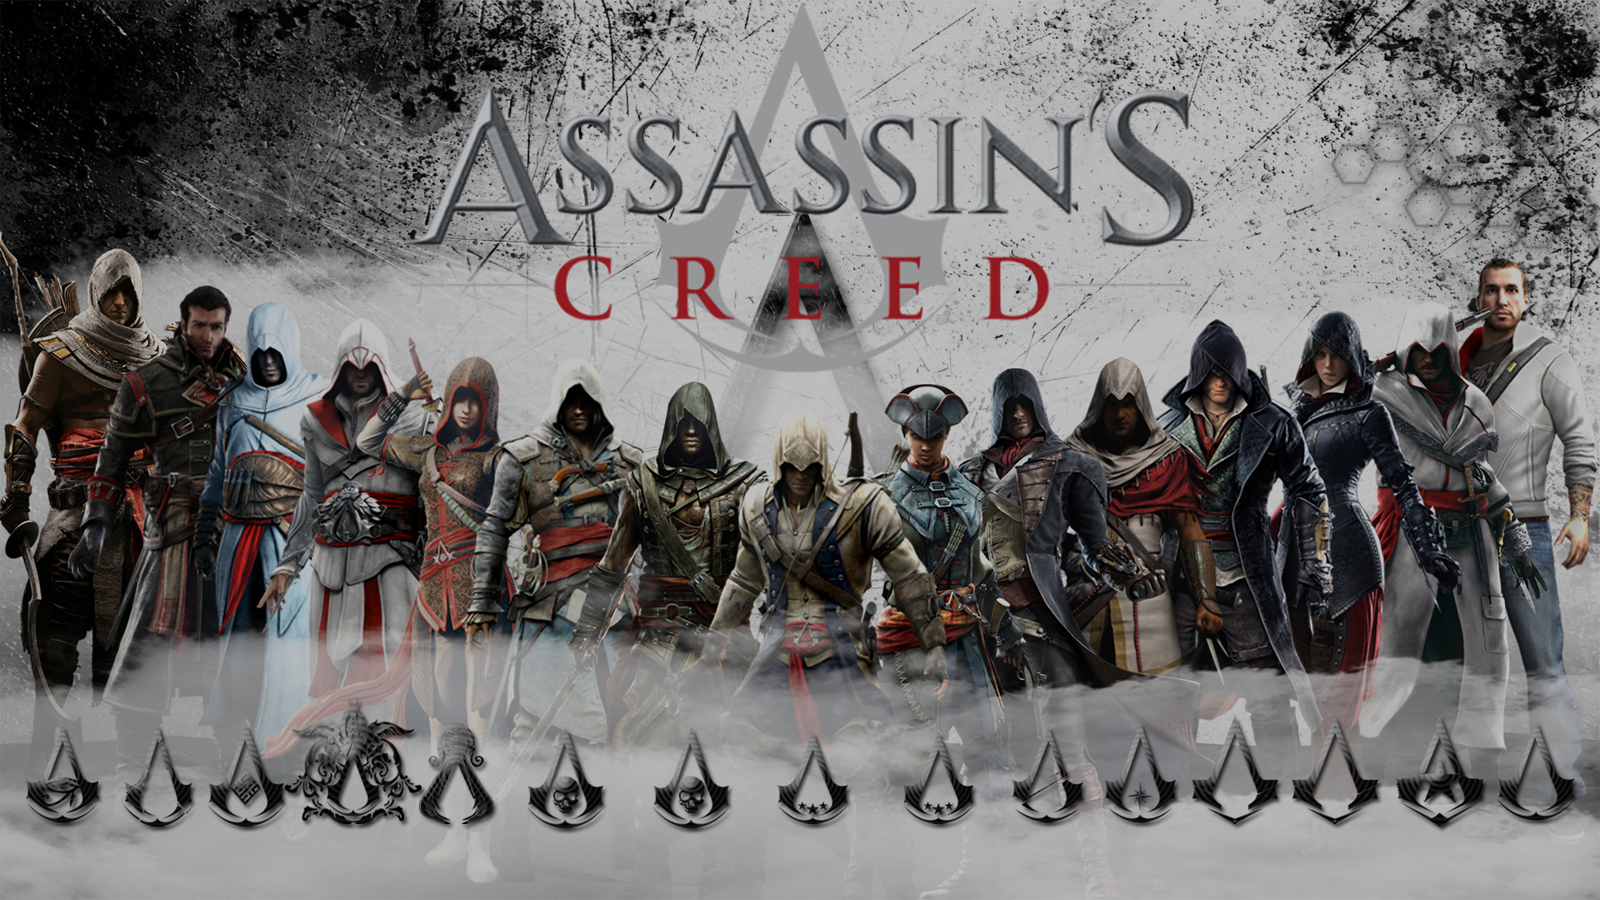 1920x1080 Background connor (assassin's creed), assassin's creed, shay cormac, video game, altair (assassin's creed), ezio (assassin's creed)